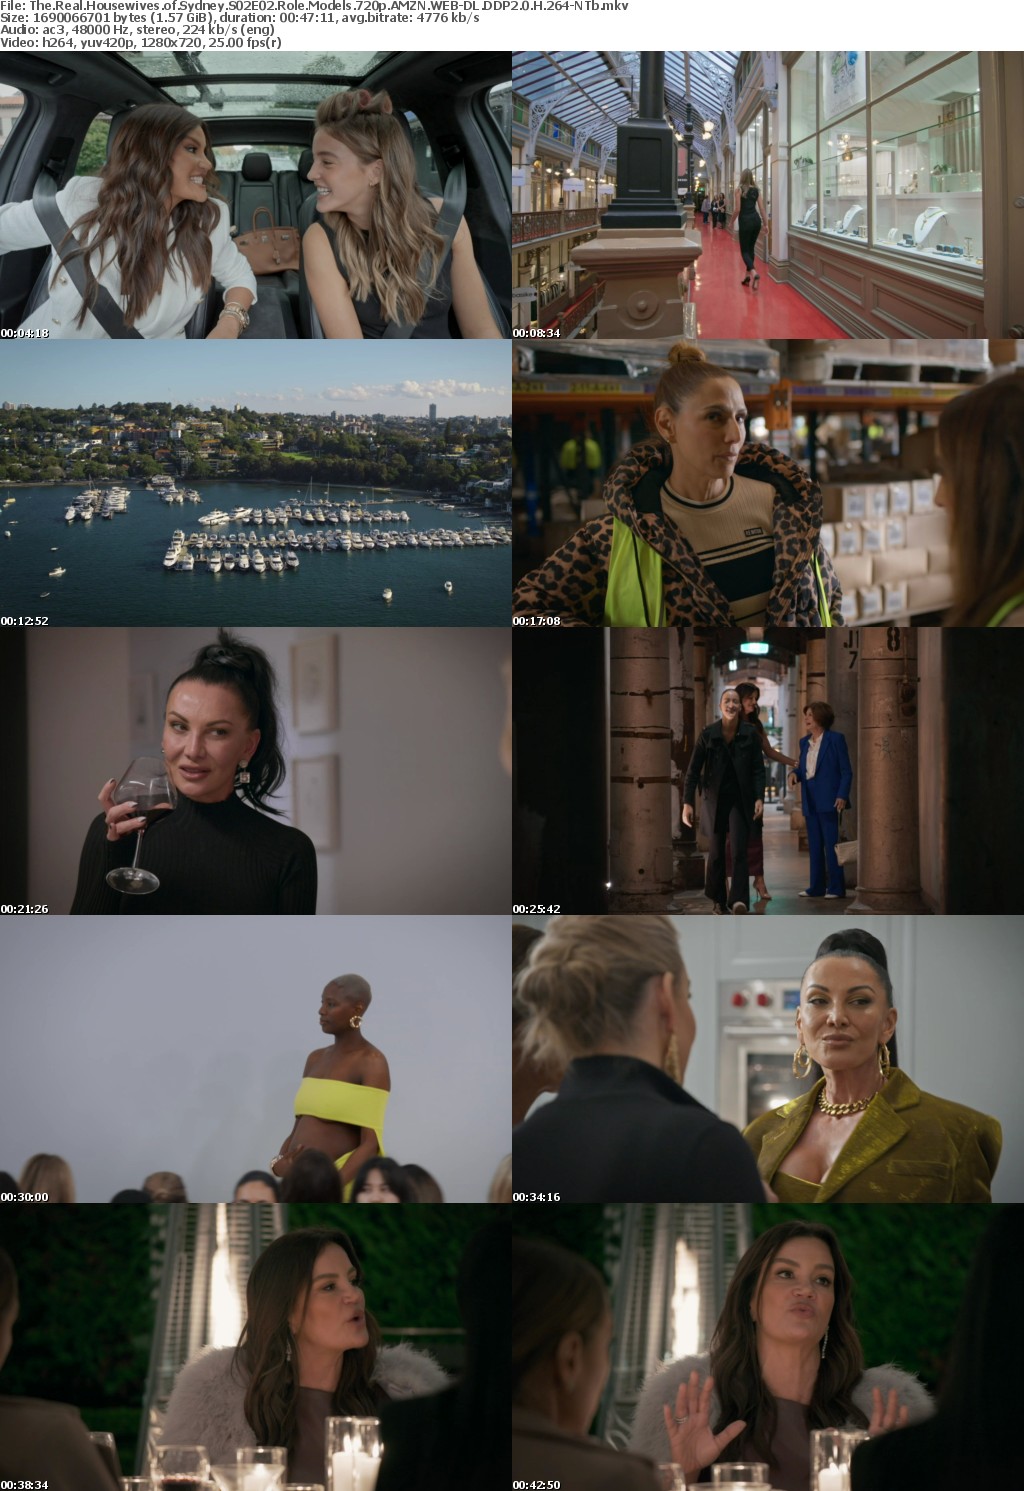 The Real Housewives of Sydney S02E02 Role Models 720p AMZN WEB-DL DDP2 0 H 264-NTb